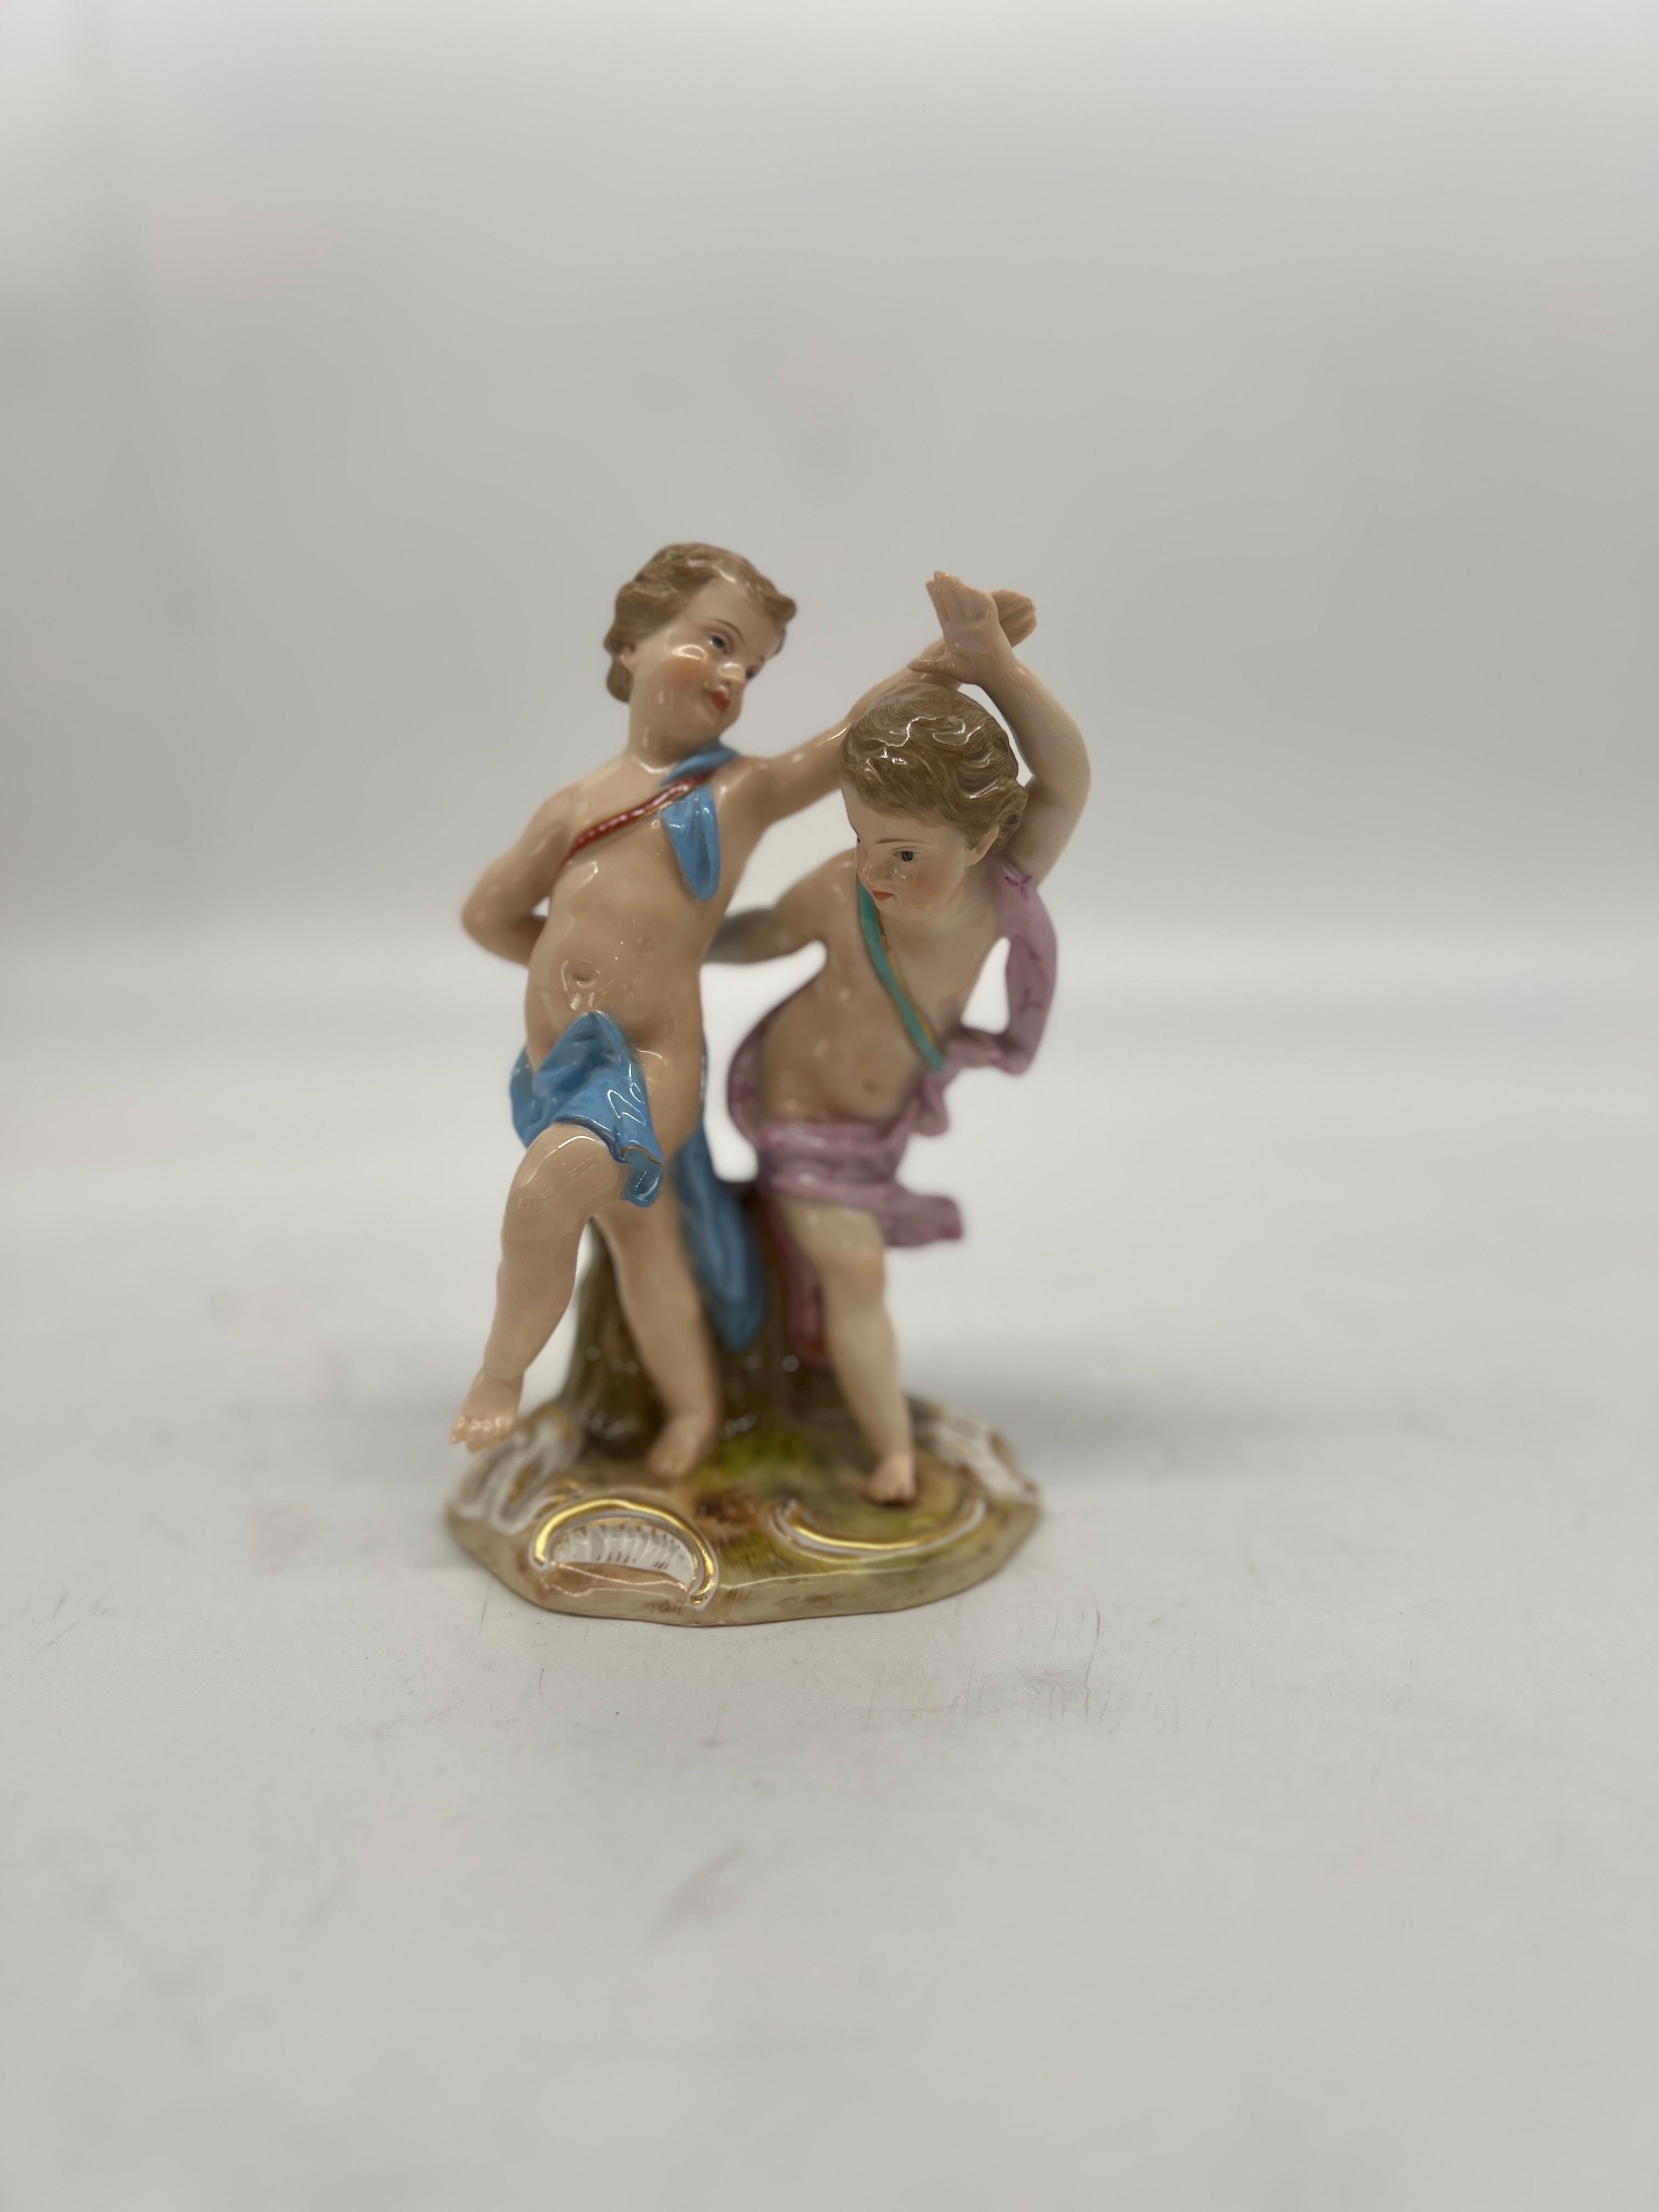 This antique Meissen porcelain figurine depicts two dancing figures and dates back to approximately 1815. The piece is crafted from high-quality porcelain and features intricate details and a beautiful antique finish. The brand is Meissen, a highly